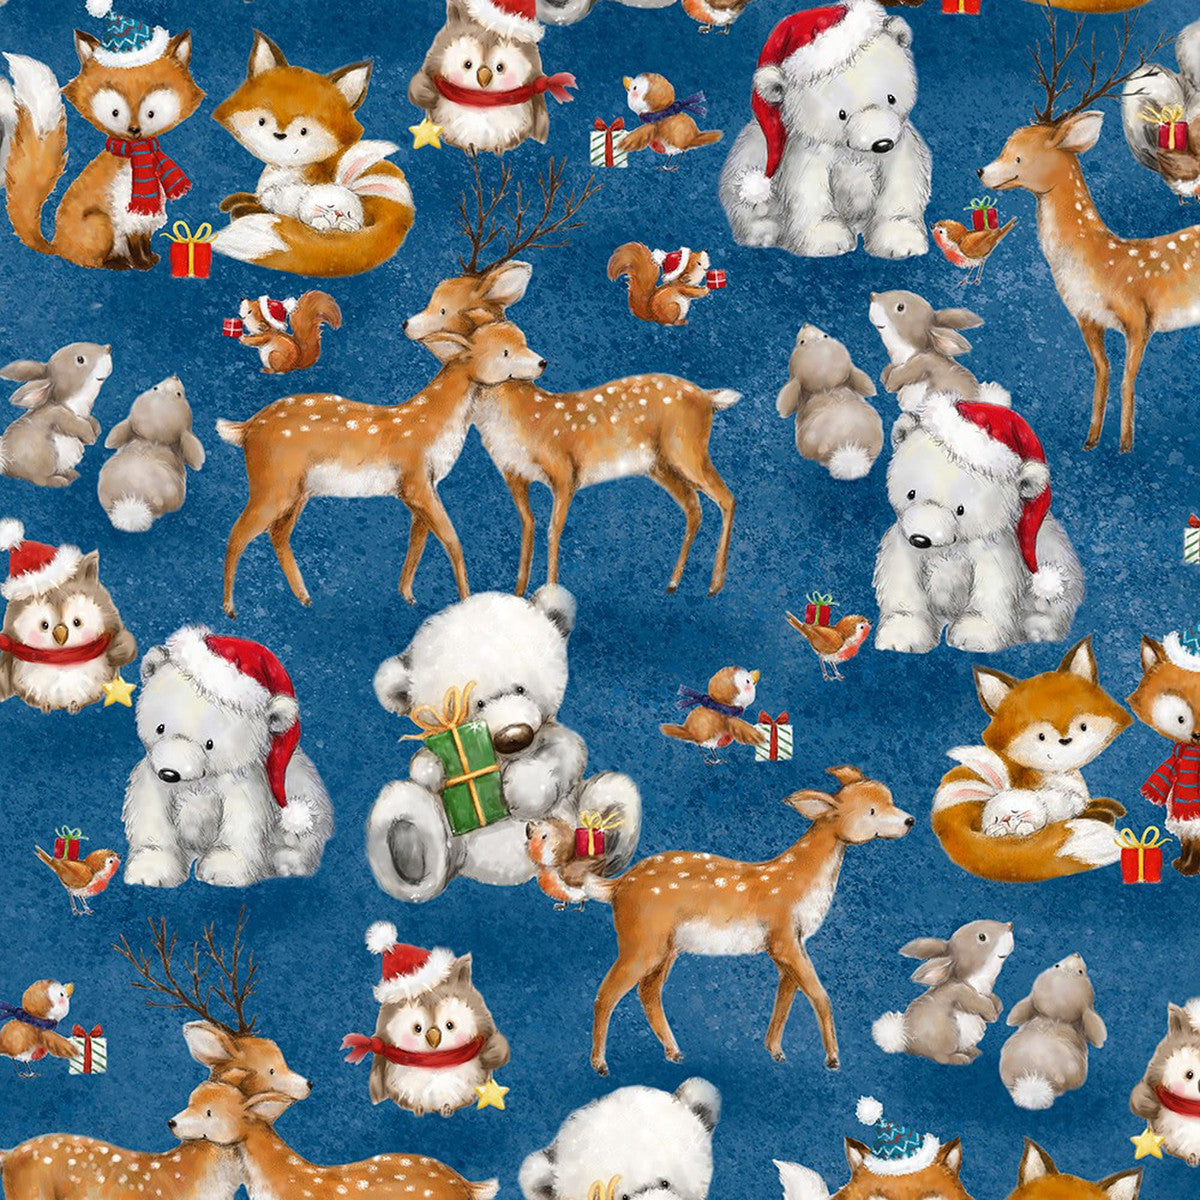 44 x 36 Critter Couples Woodland Gifts Blue Wilmington Prints 100% Cotton Christmas